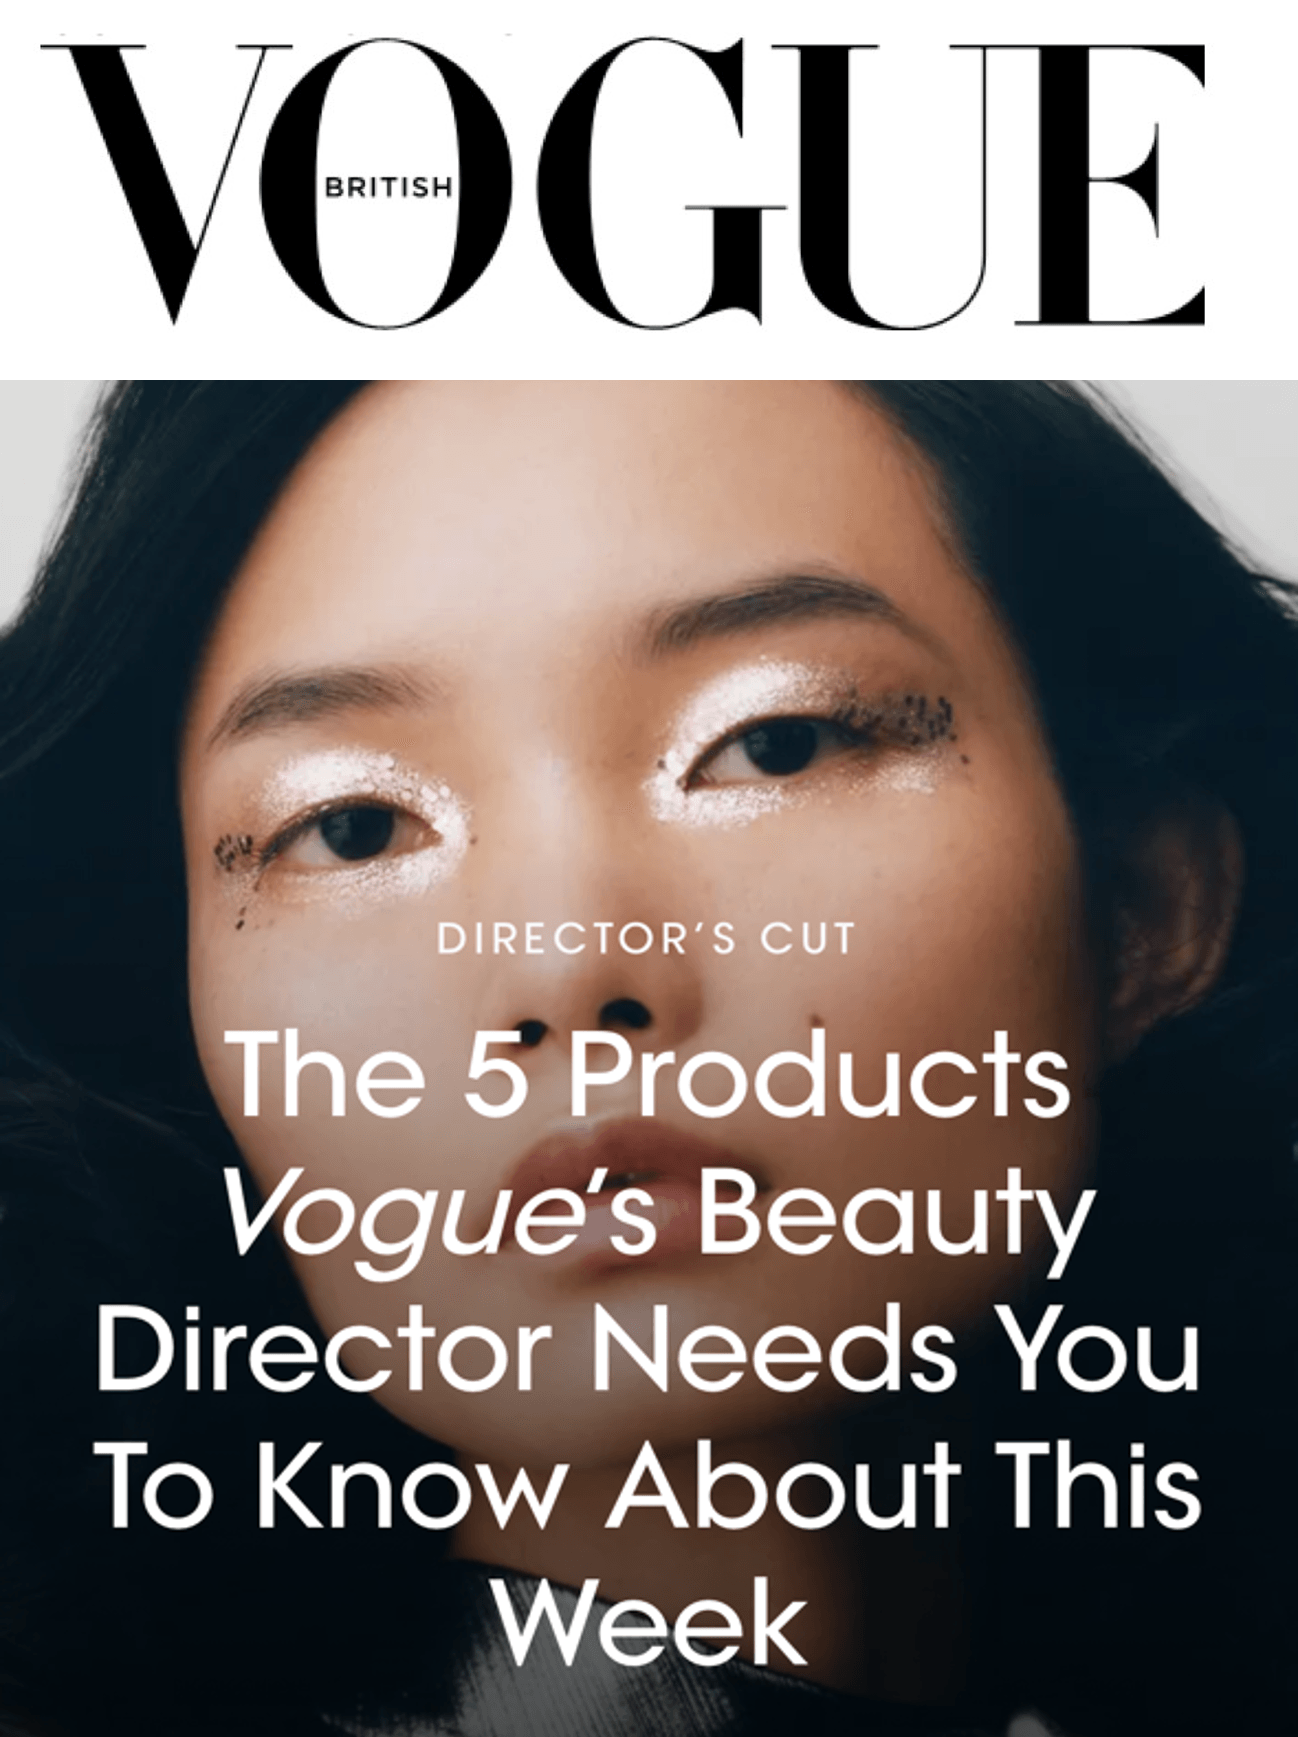 British Vogue - The 5 Products Vogue Beauty Director Need You To Know About This Week - fjör